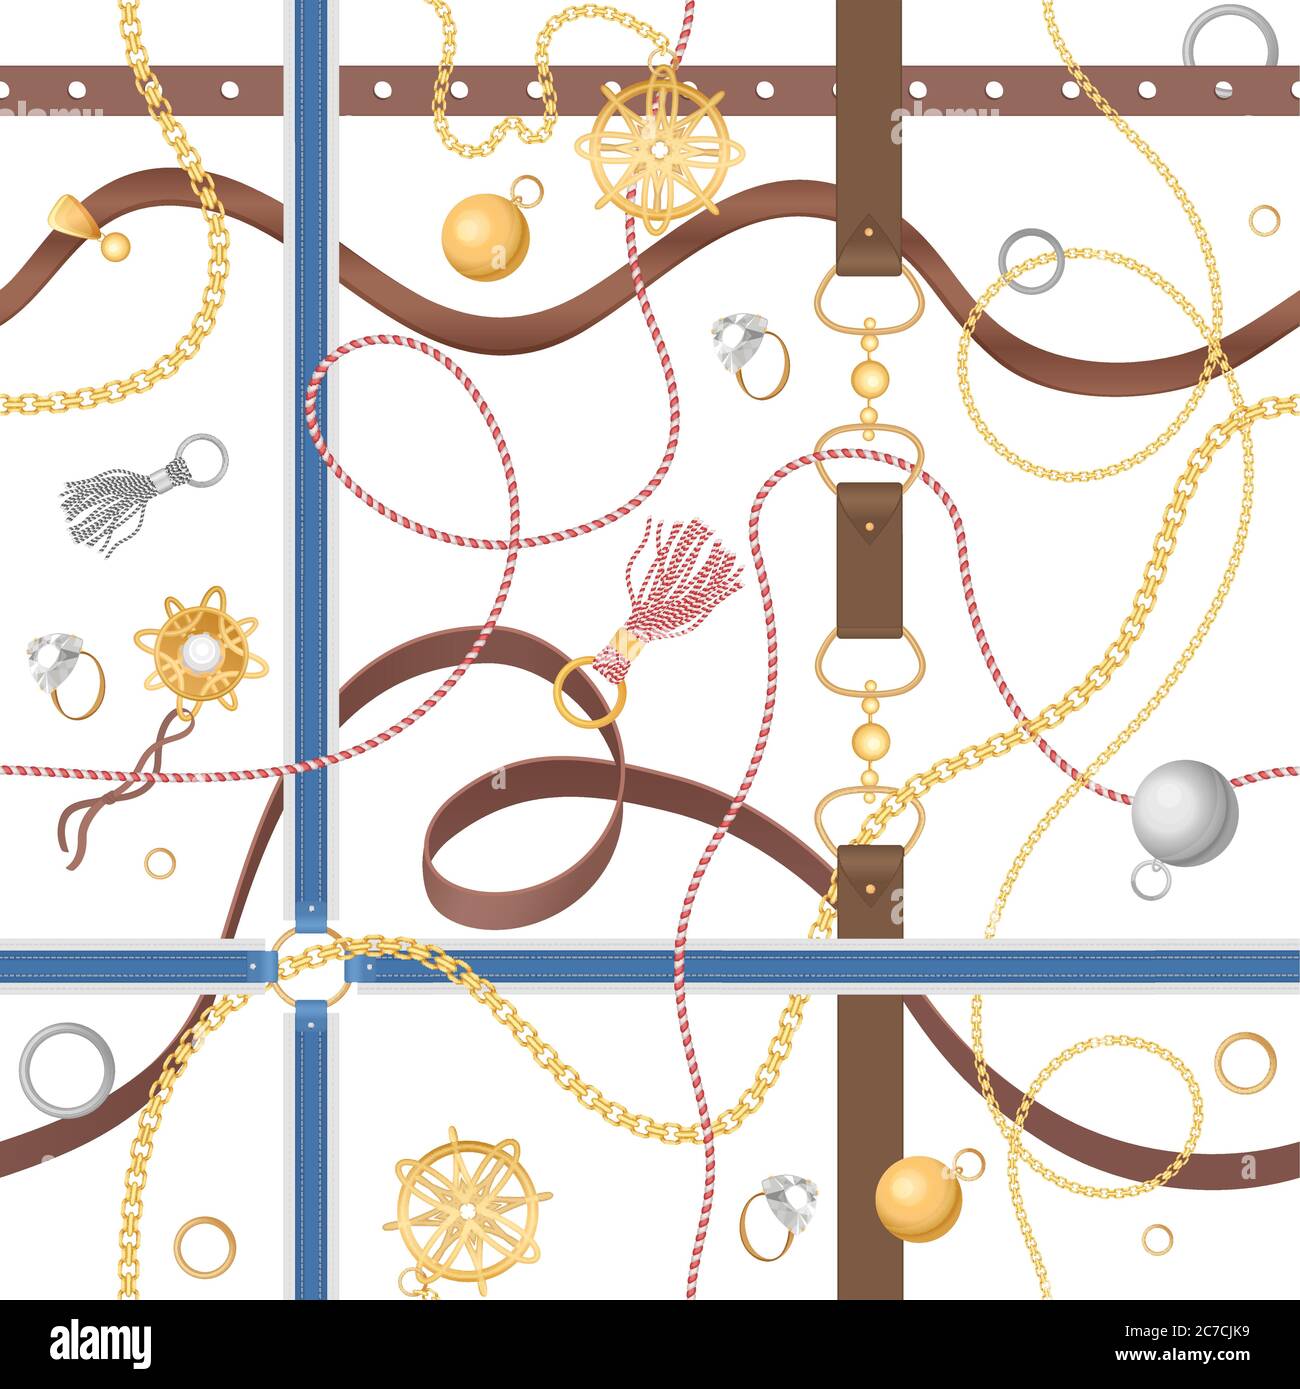 Seamless pattern with chains, rings and jewelry golden accessories vector illustration Stock Vector